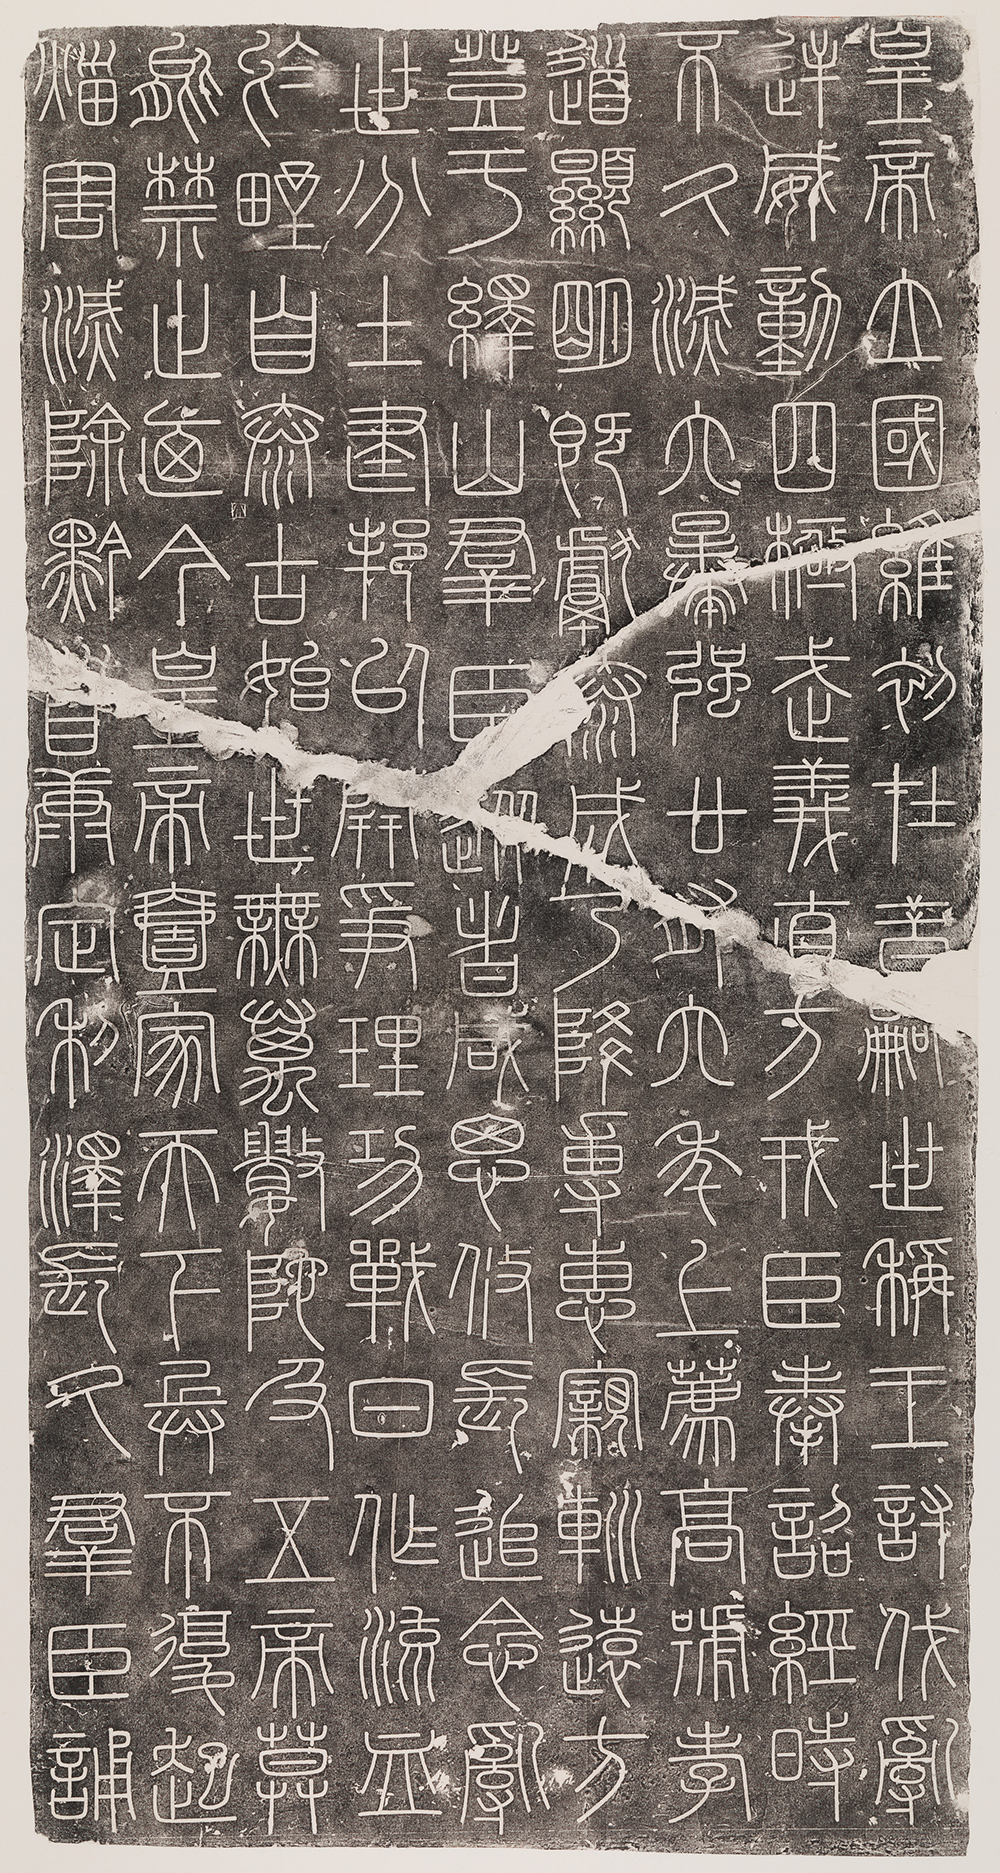 Inscriptions from the stele of Mount Yi, after Xu Xuan, Song dynasty. The Metropolitan Museum of Art, Seymour and Rogers Funds, 1977. In 219 BC Qin Shihuang visited Mount Yi. He ordered that a stele be erected there and calligraphed with a text in the newly standardized script. The text praises the emperor for bringing peace to the world by defeating Qin’s six rival states and unifying them under his rule. Although the stele was destroyed by fire during the Tang dynasty (618–907), the inscription was passed down by scholars; these rubbings were taken from a stele that dates from the tenth century.